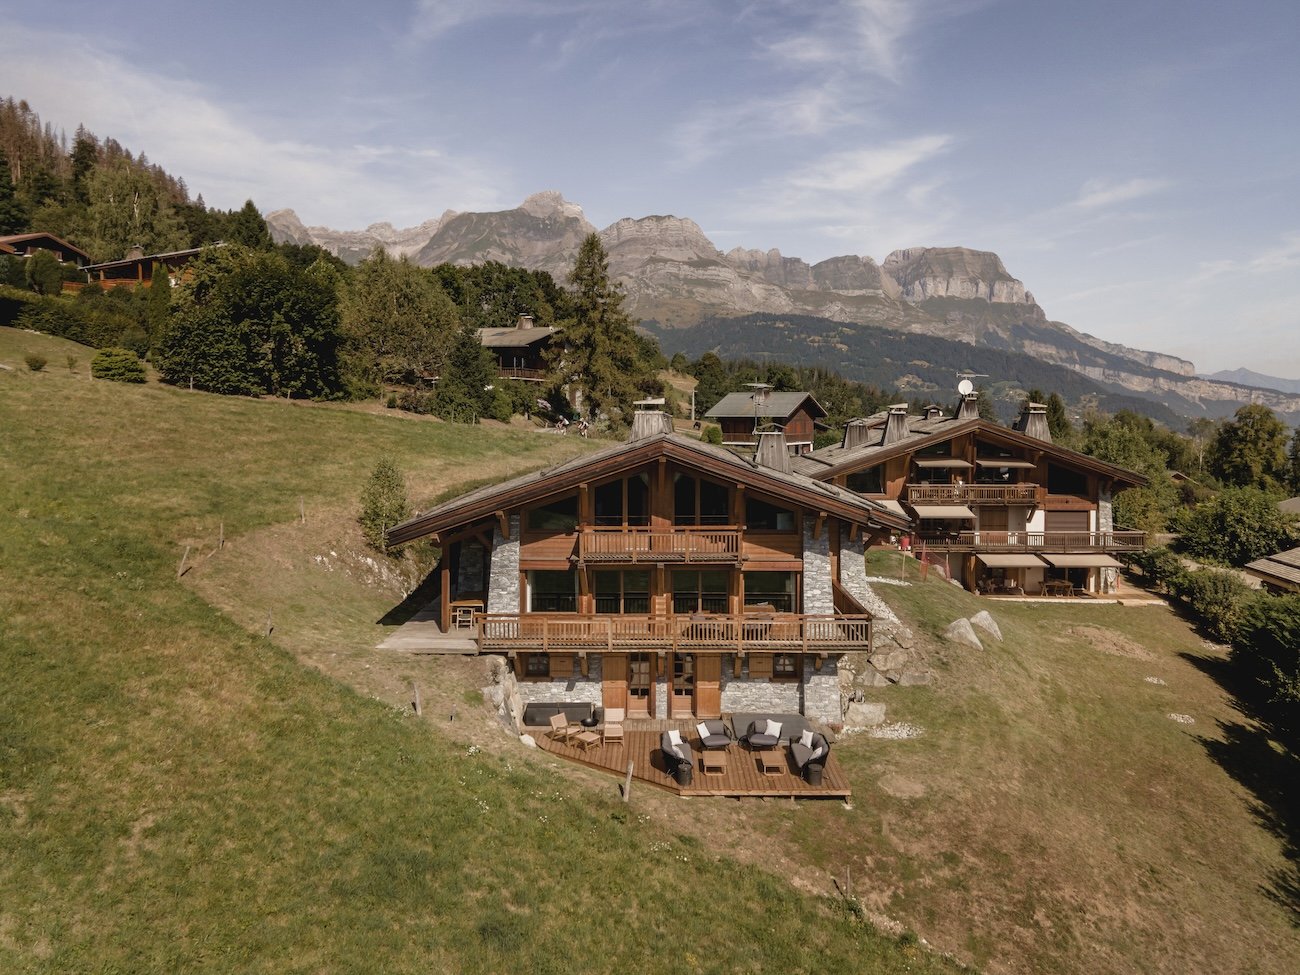 Francis+York+Discover This Luxury Chalet in the French Alps From The August Premium Collection 00004.jpg